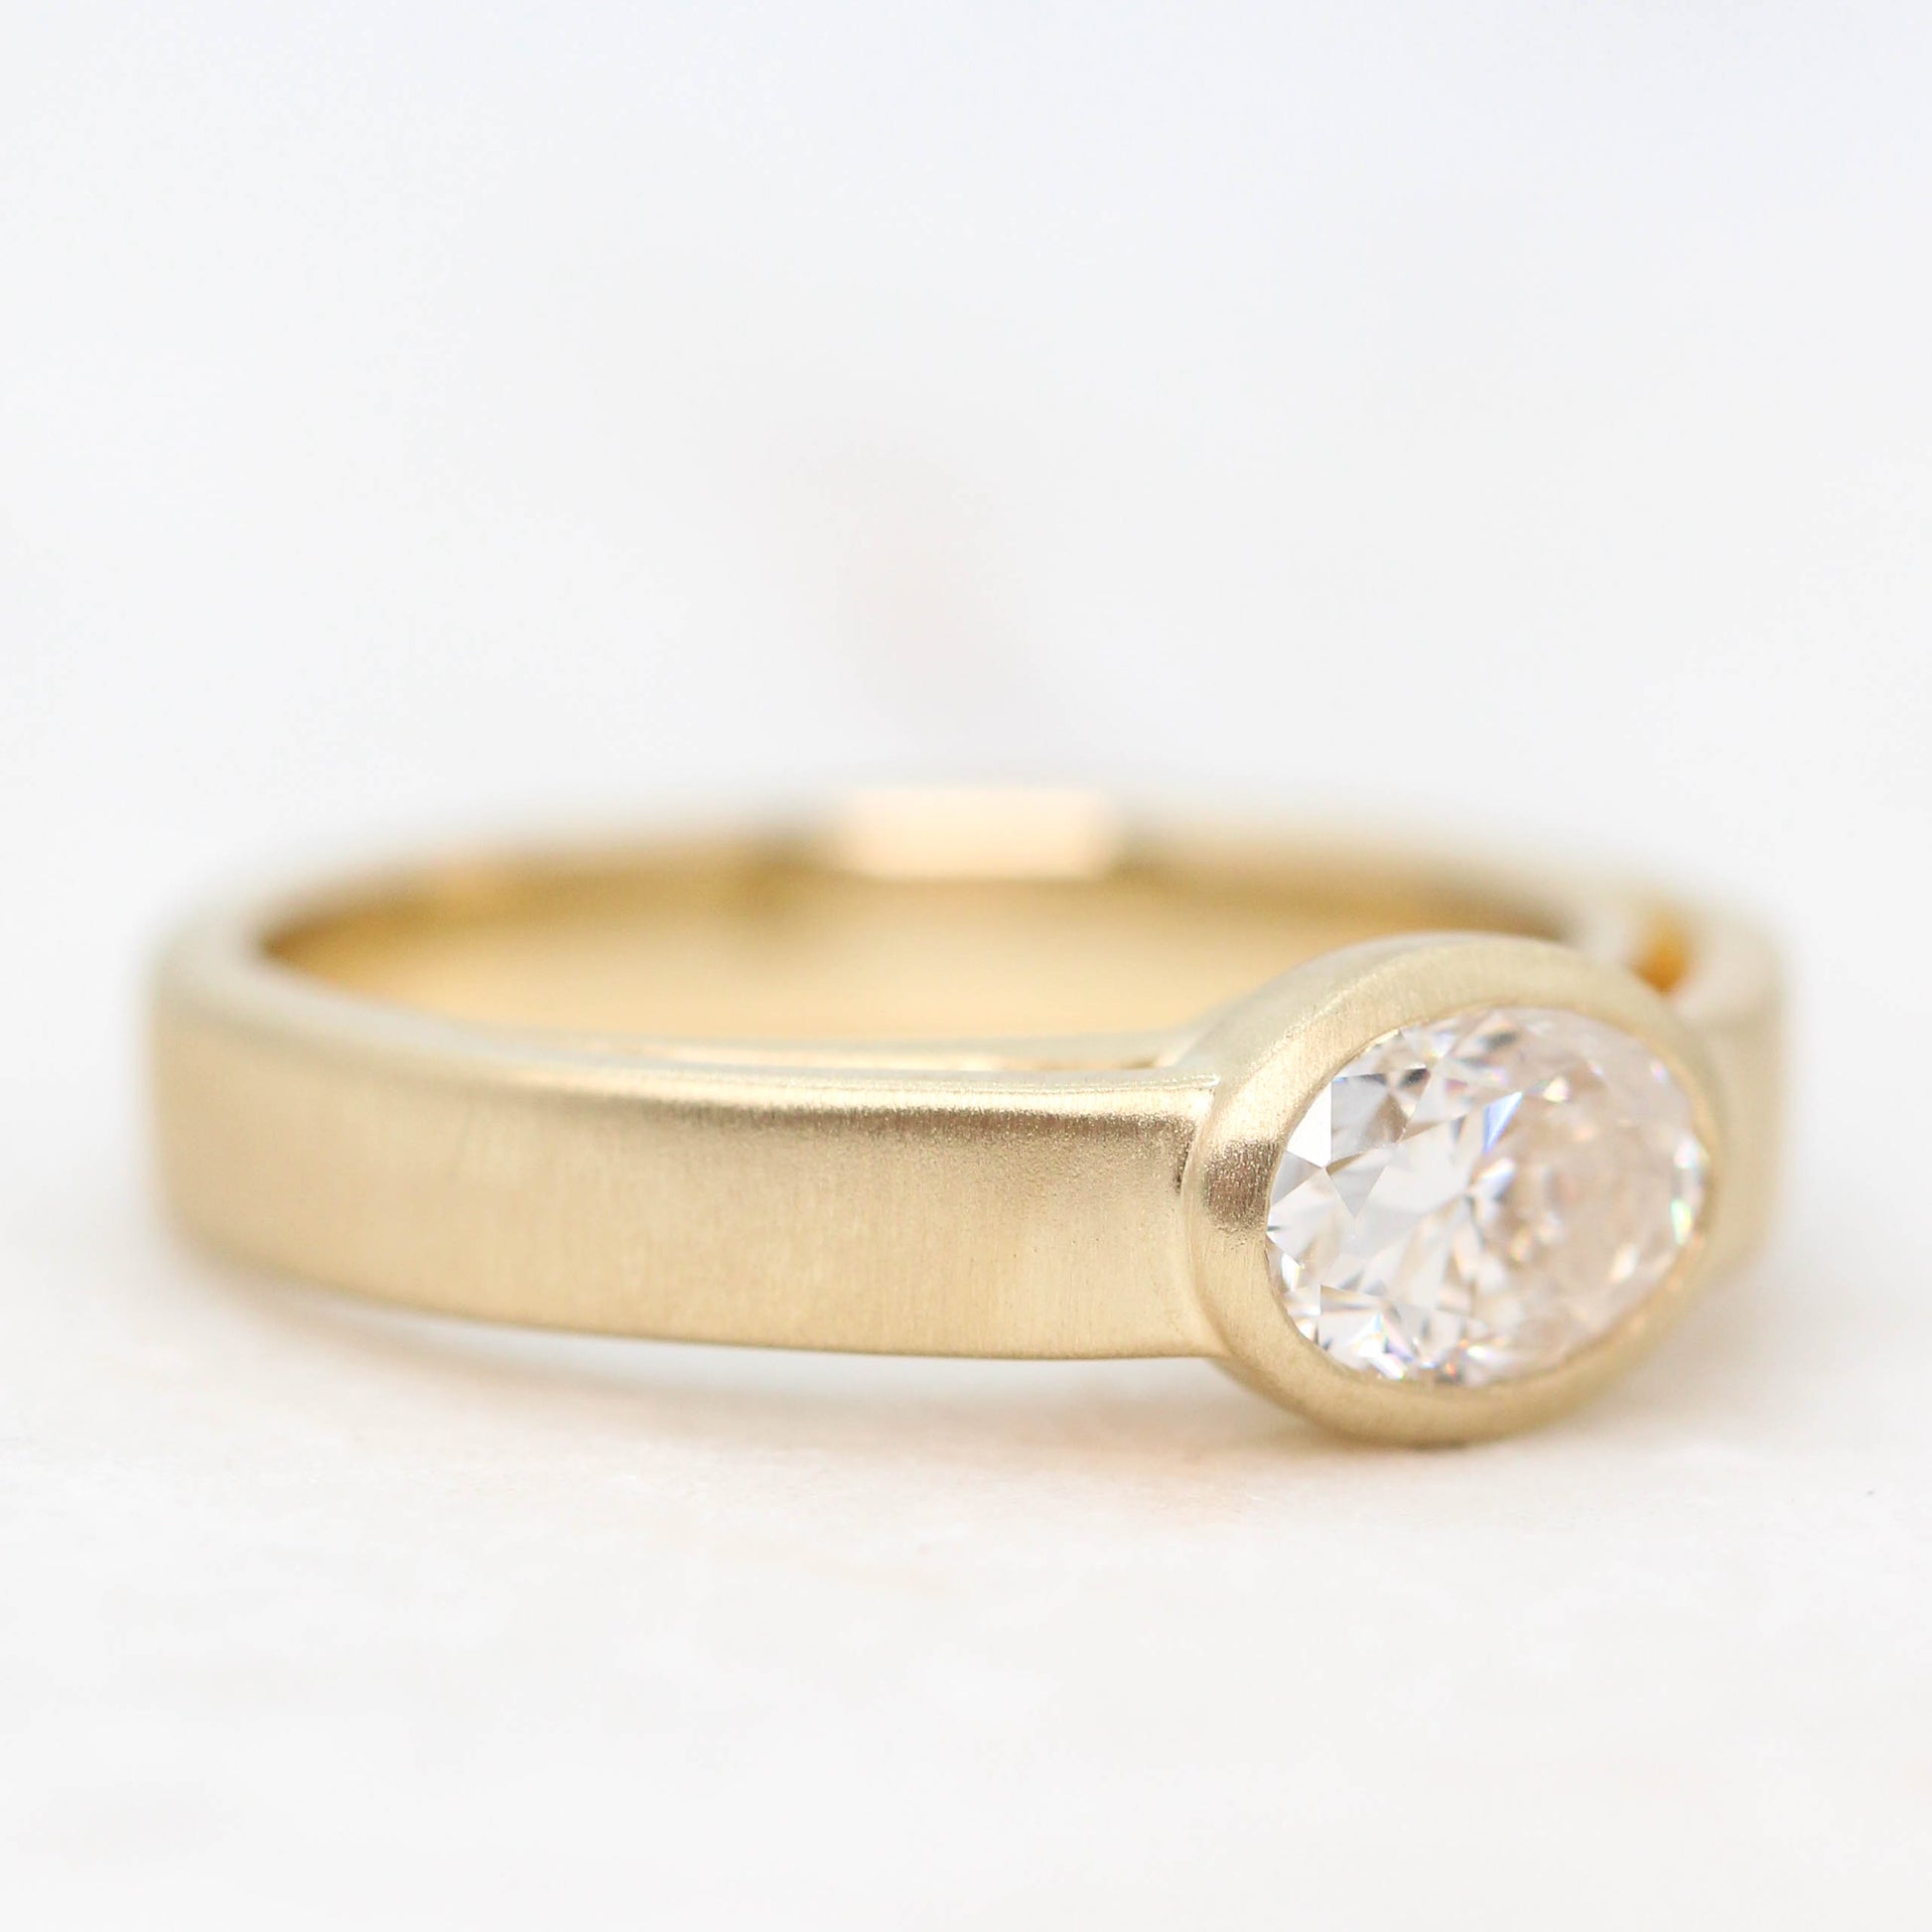 Mabel Ring - Bezel Unisex Band - Oval Moissanite - Made to Order, Choose Your Gold Tone - Midwinter Co. Alternative Bridal Rings and Modern Fine Jewelry